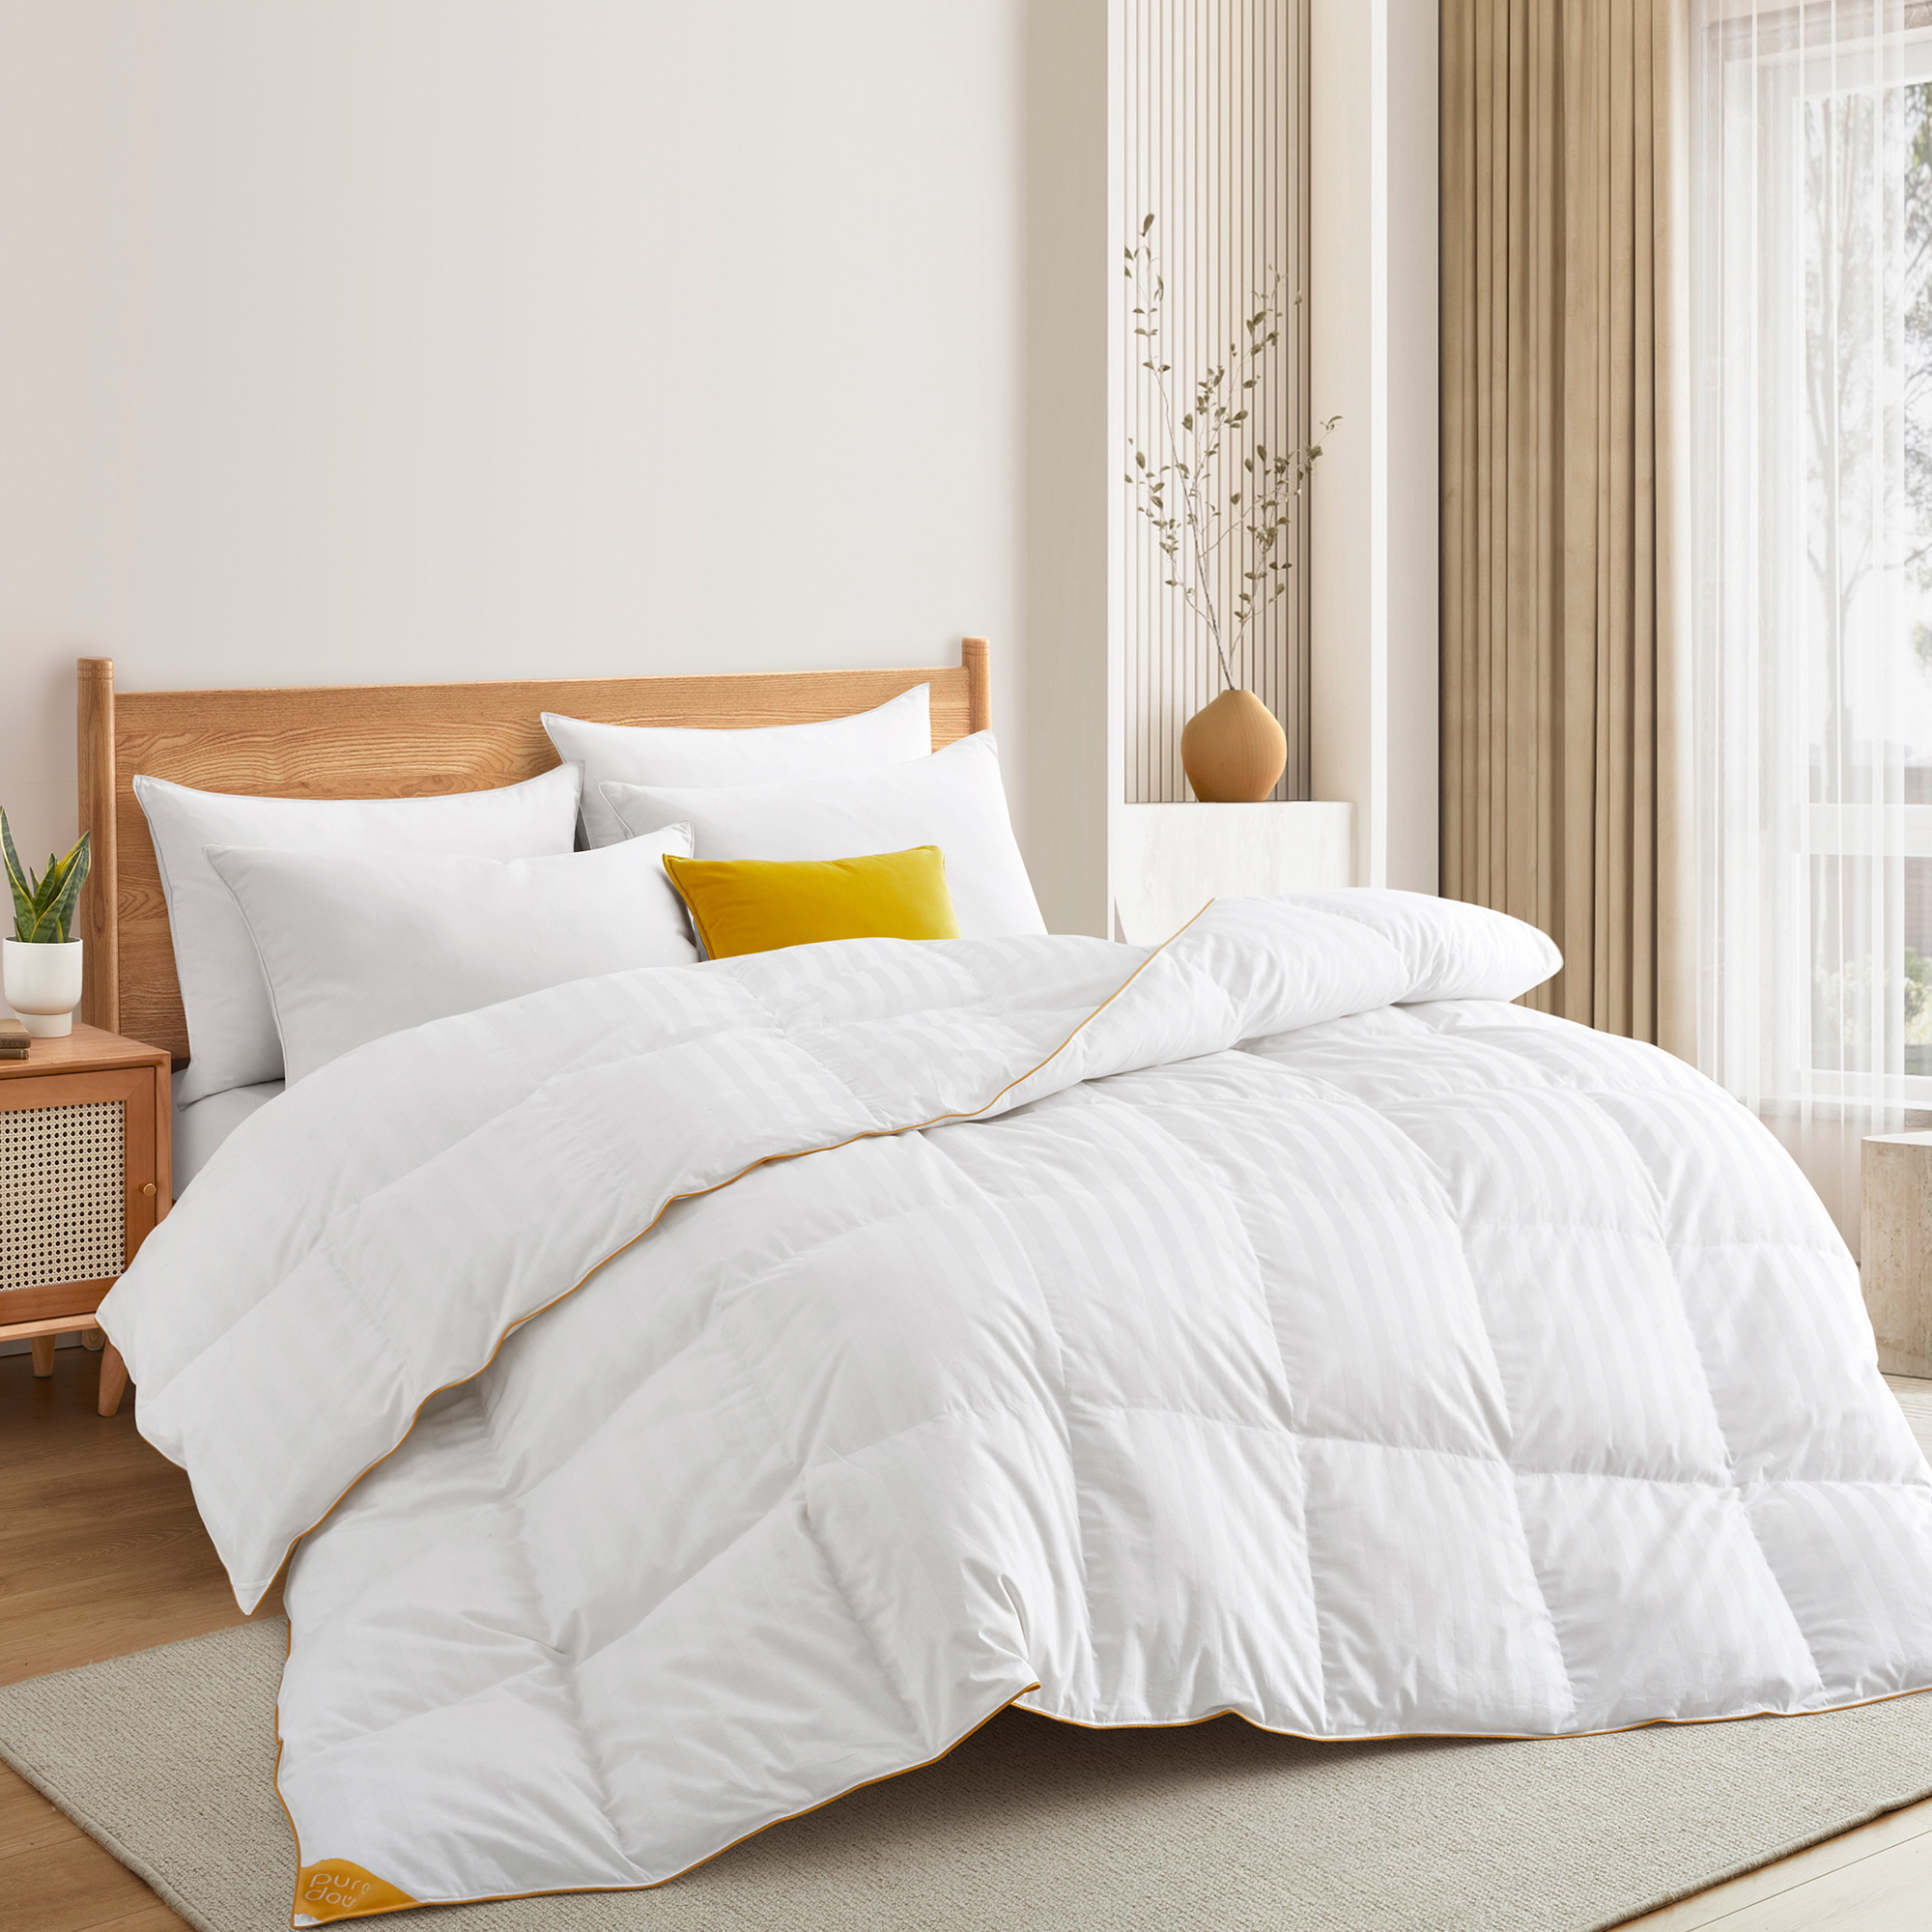 500 TC White Goose Down Feather All Season Comforter Breathable Cotton Cover, Baffled Box Duvet Insert - Queen-90*90